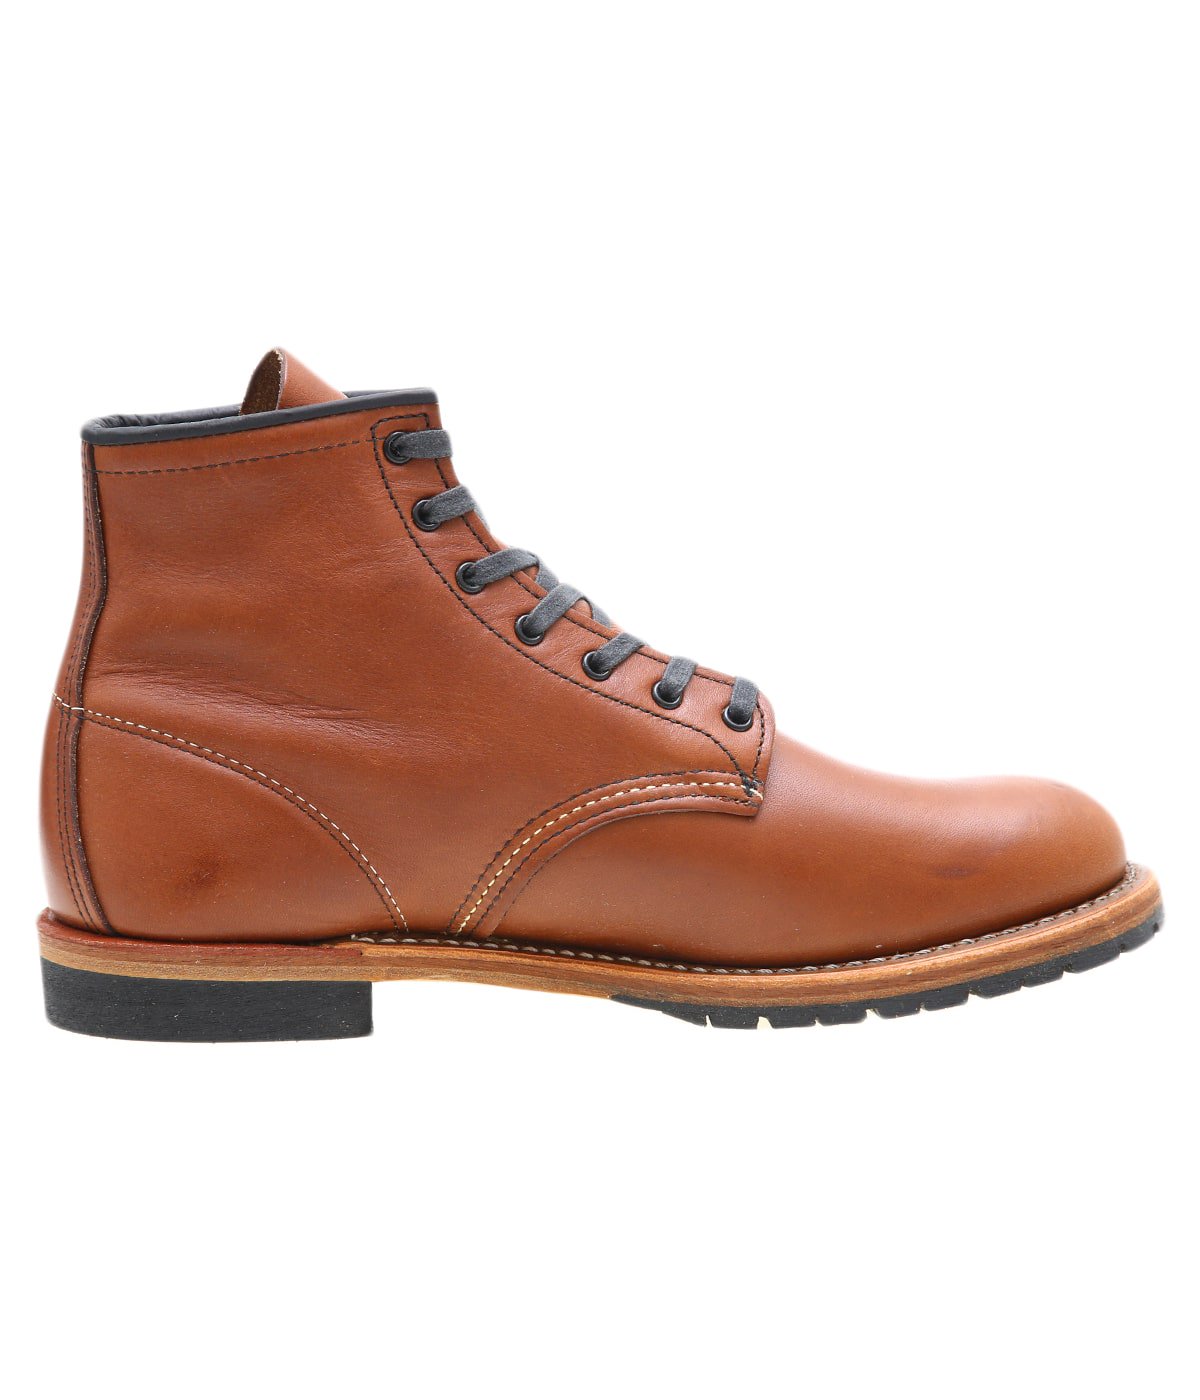 ROUND-TOE BECKMAN BOOTS STYLE NO.9016